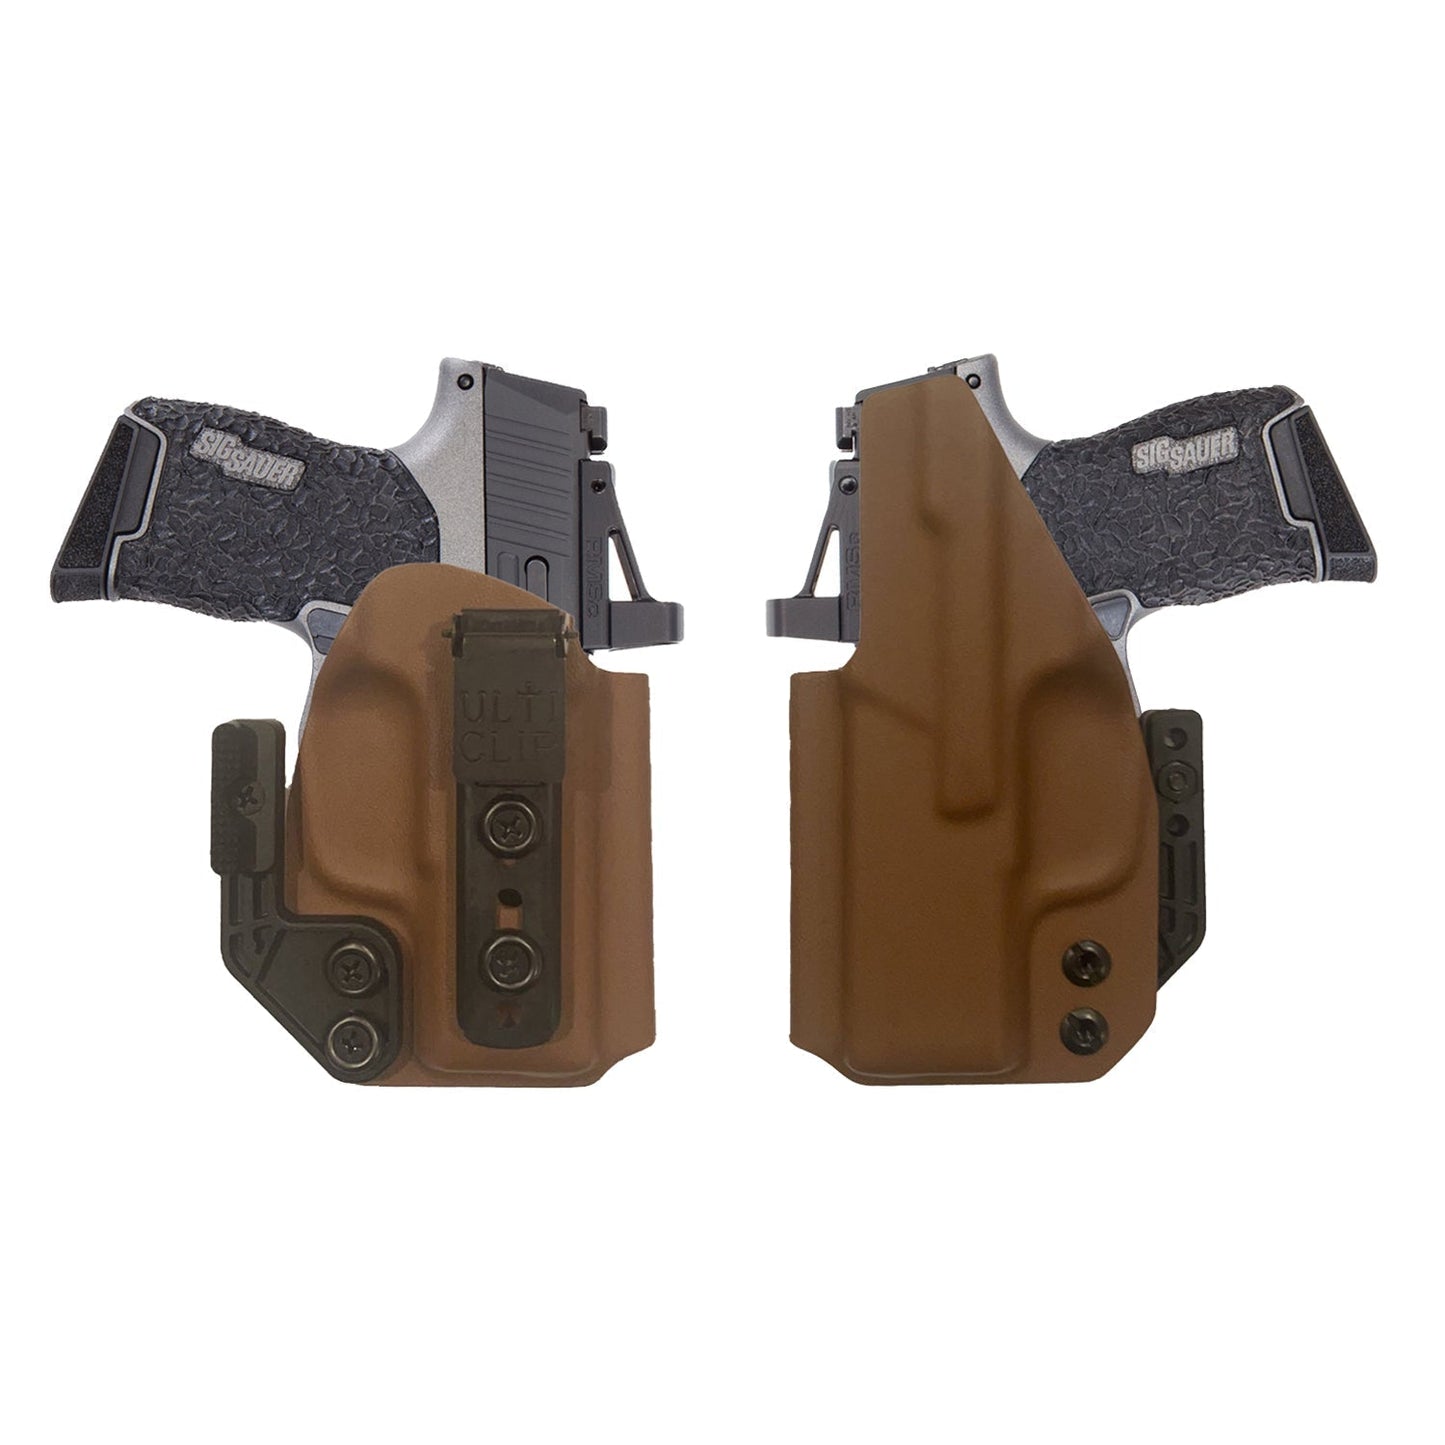 GLOCK 21 WIth TLR1 Light (ULTI-CLIP 3) IWB (Inside The Waistband Holster)